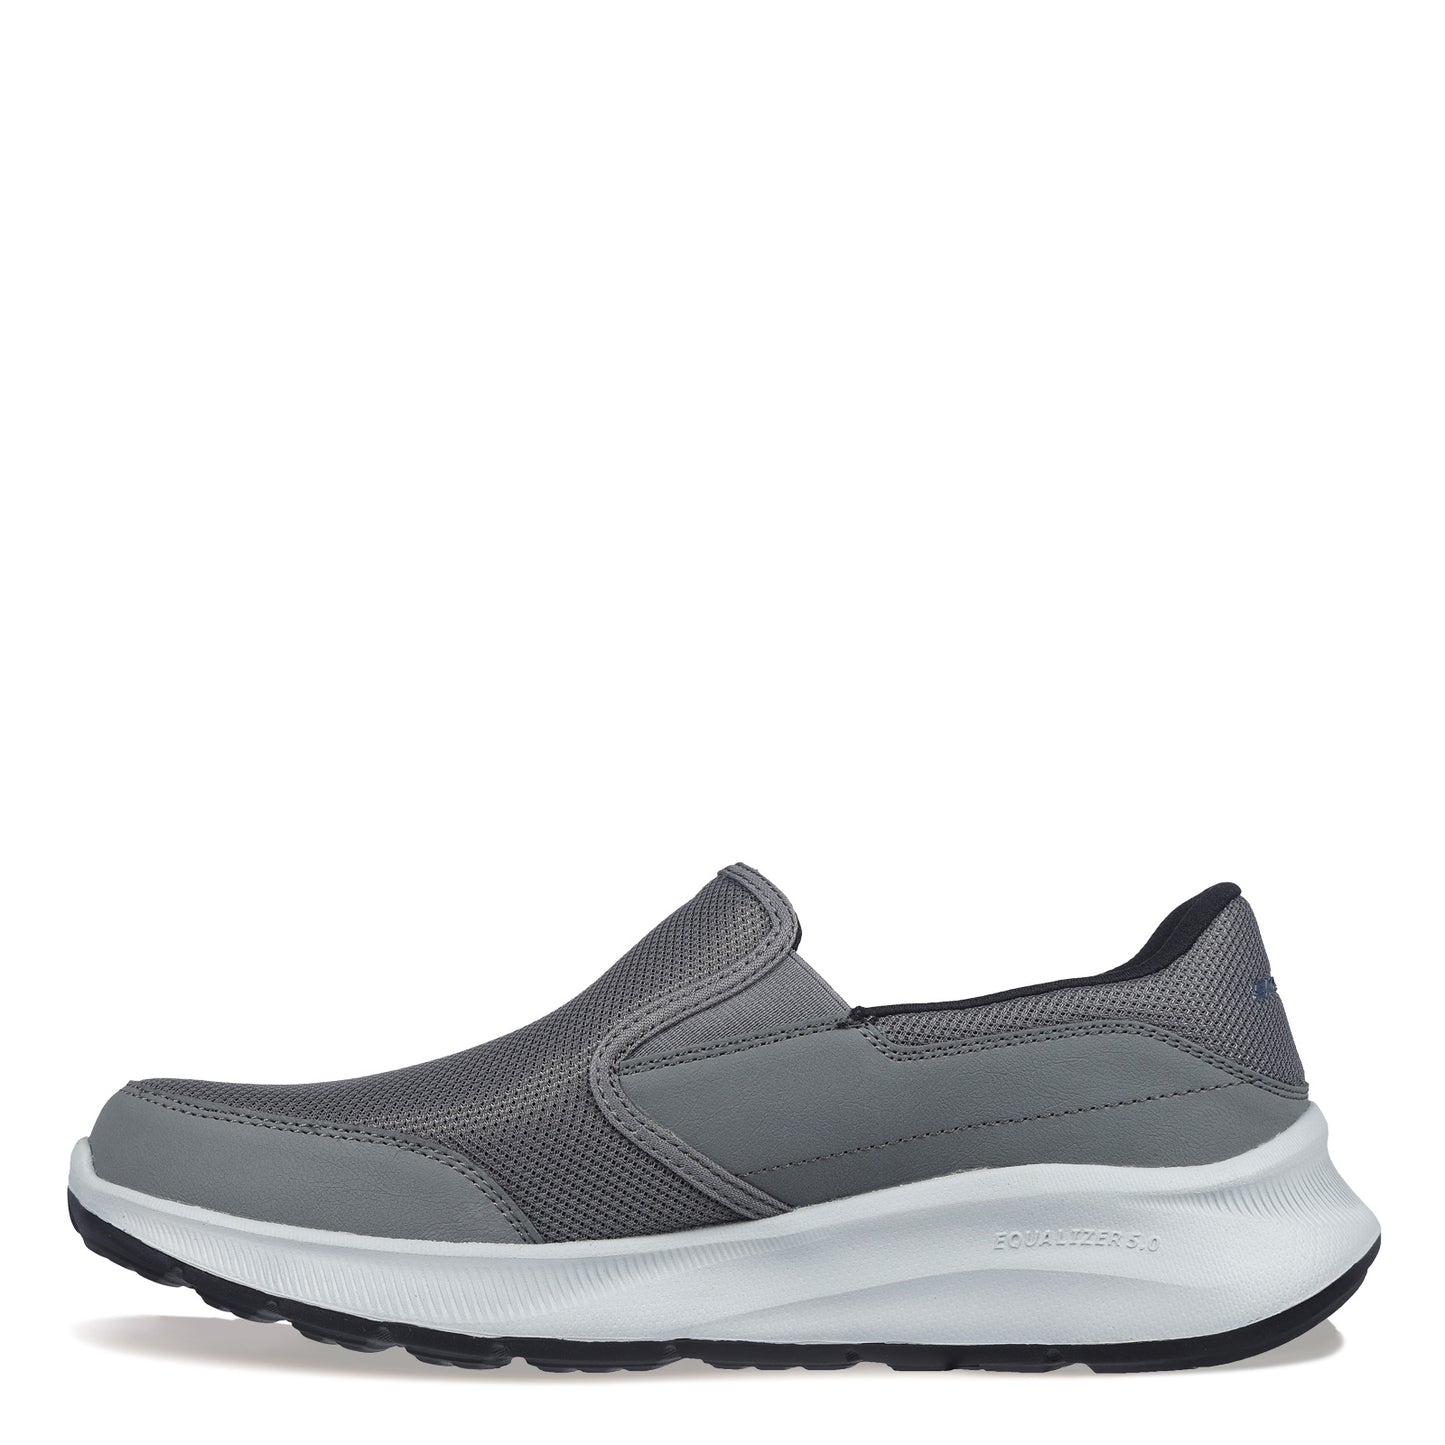 Peltz Shoes  Men's Skechers Relaxed Fit: Equalizer 5.0 - Persistable Sneaker Charcoal 232515-CHAR